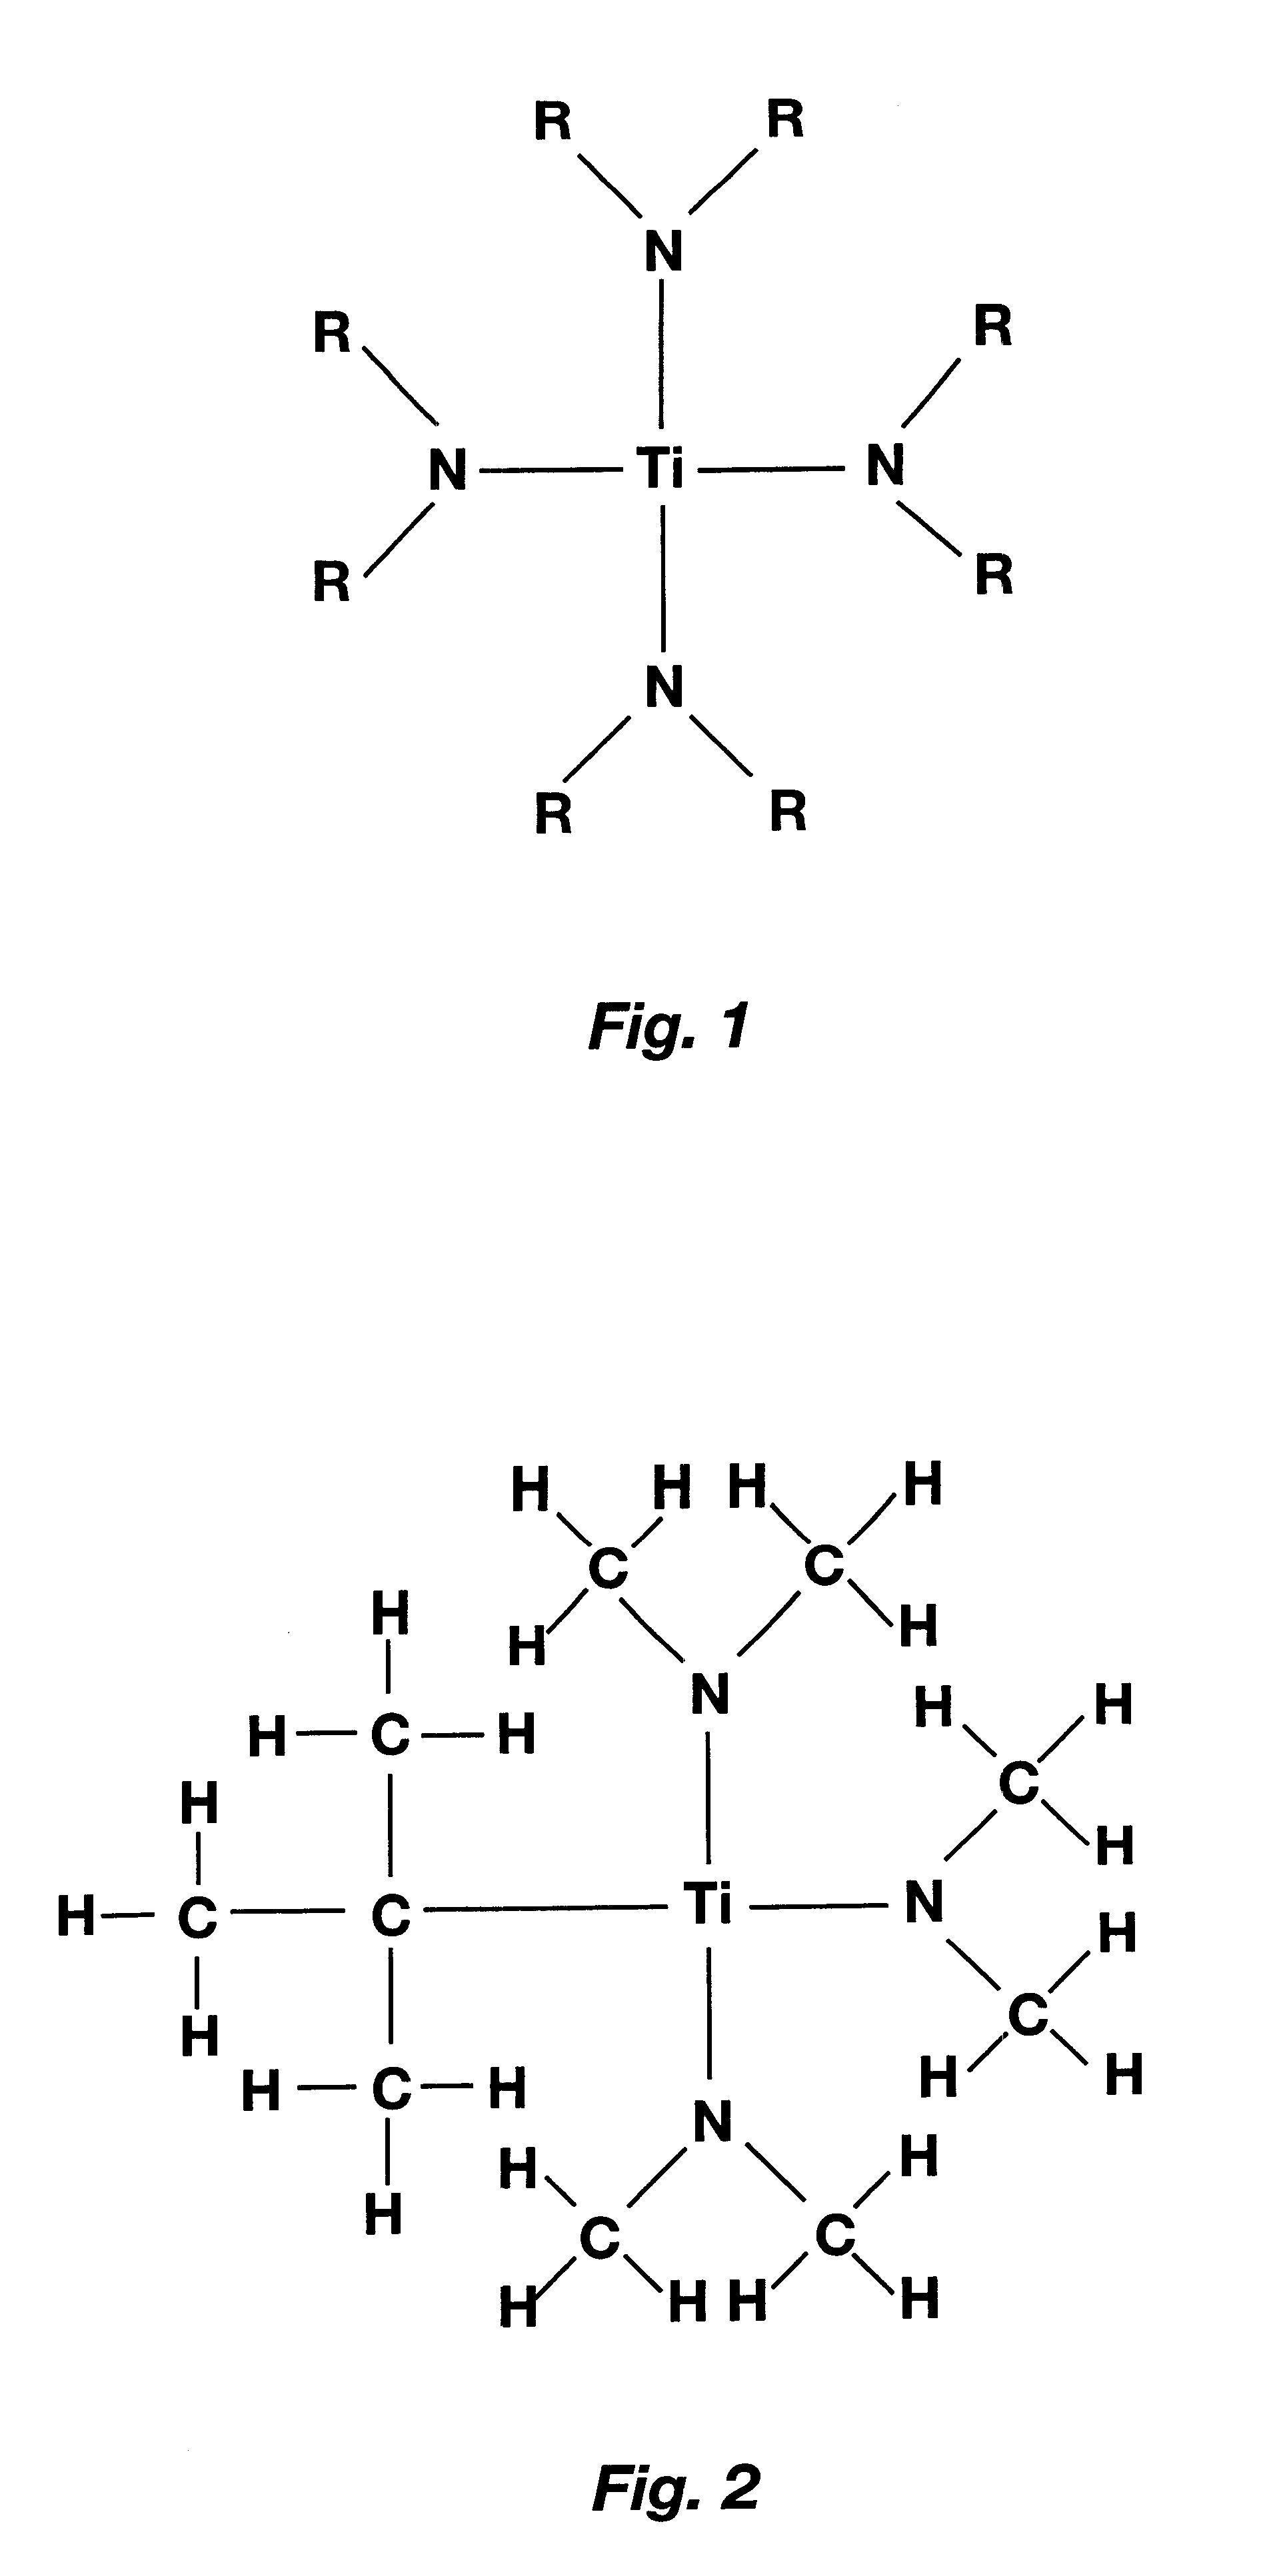 Chemical vapor deposition process for depositing titanium nitride films from an organometallic compound